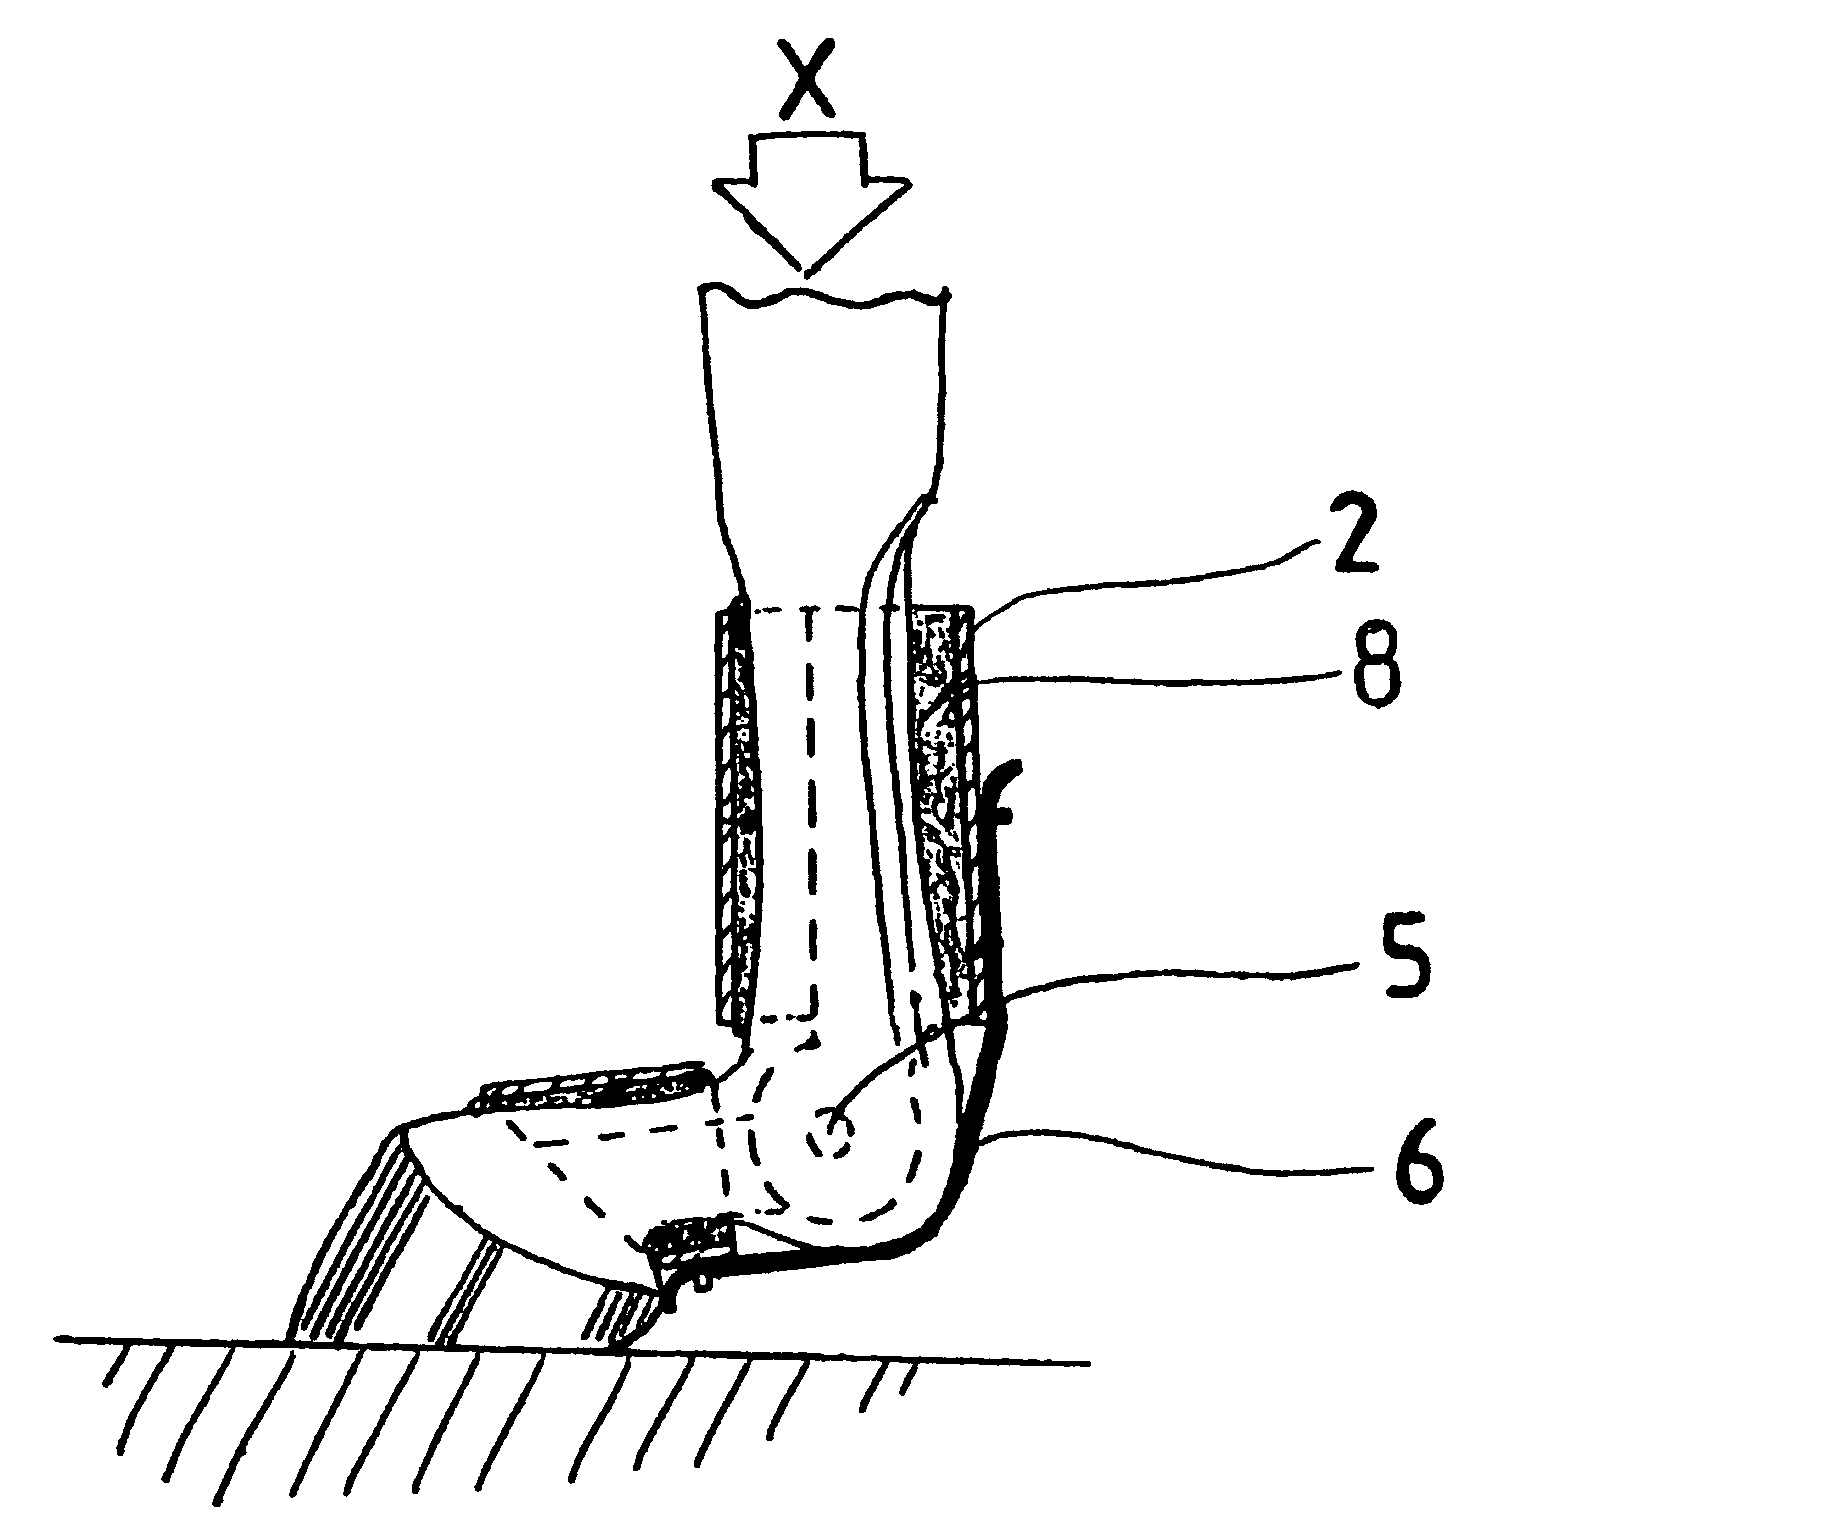 Tendon and ligament support for horse's fetlock joint